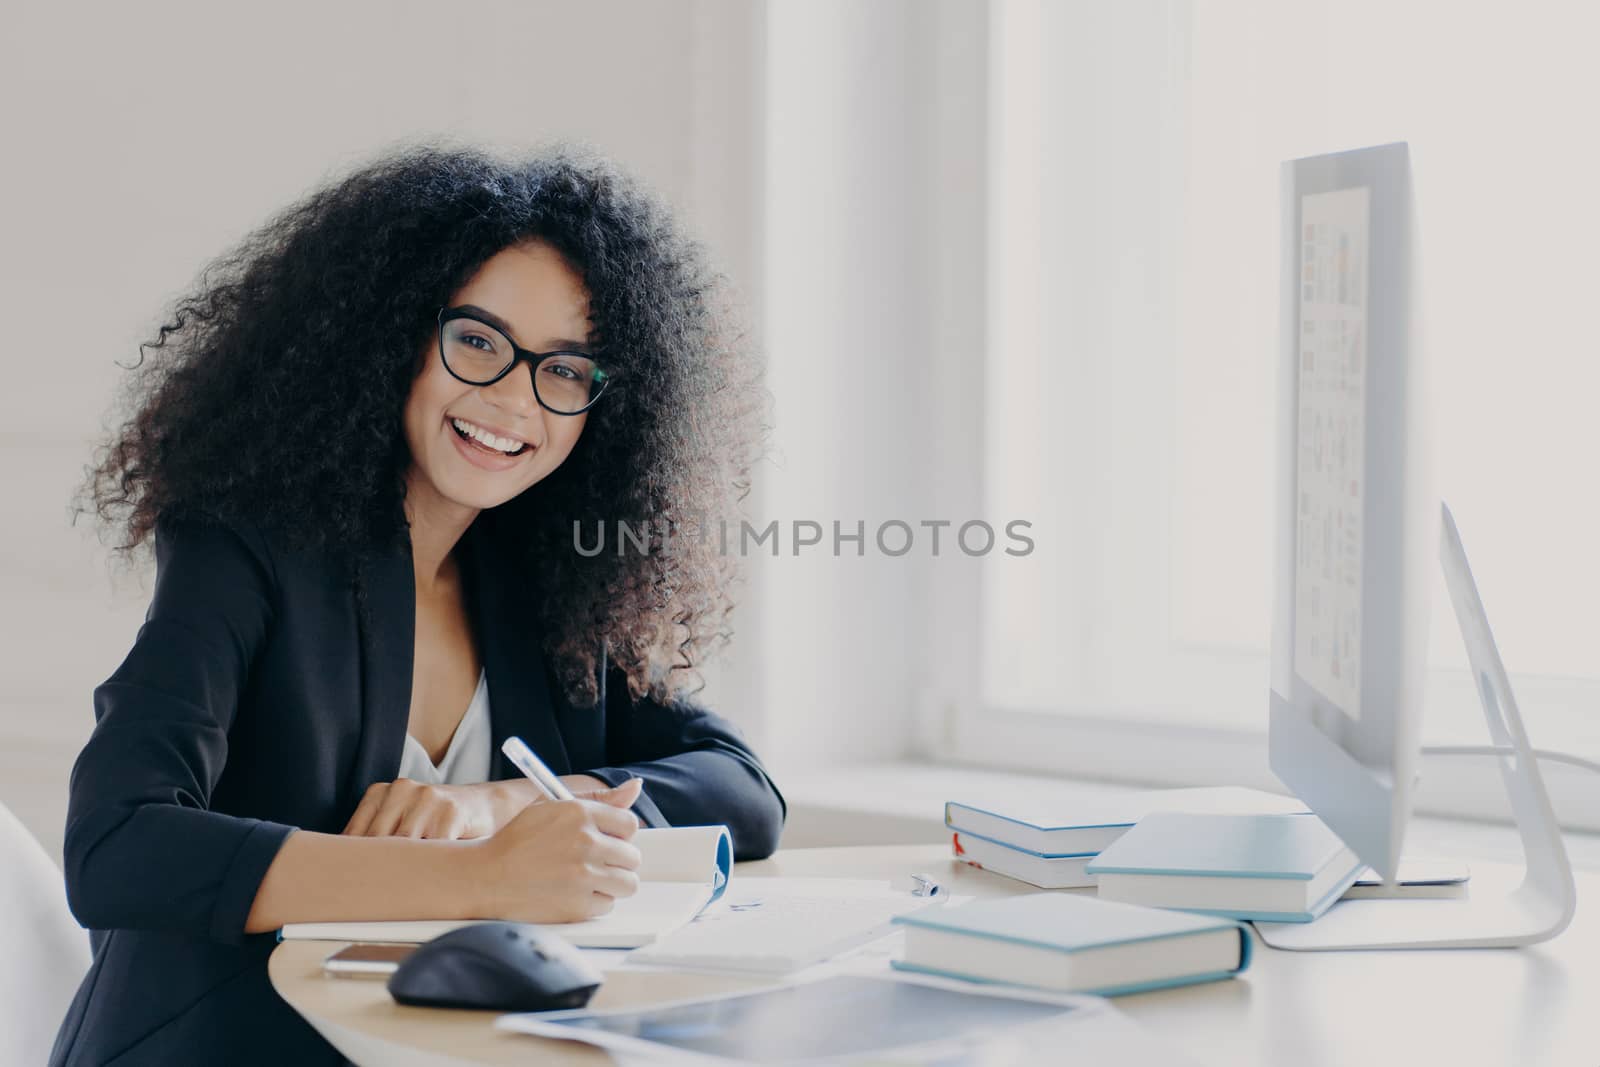 Cheerful female student writes down necessary information in notebook, makes notes, has glad expression, wears transparent glasses and black formal wear, sits at desktop with books and computer